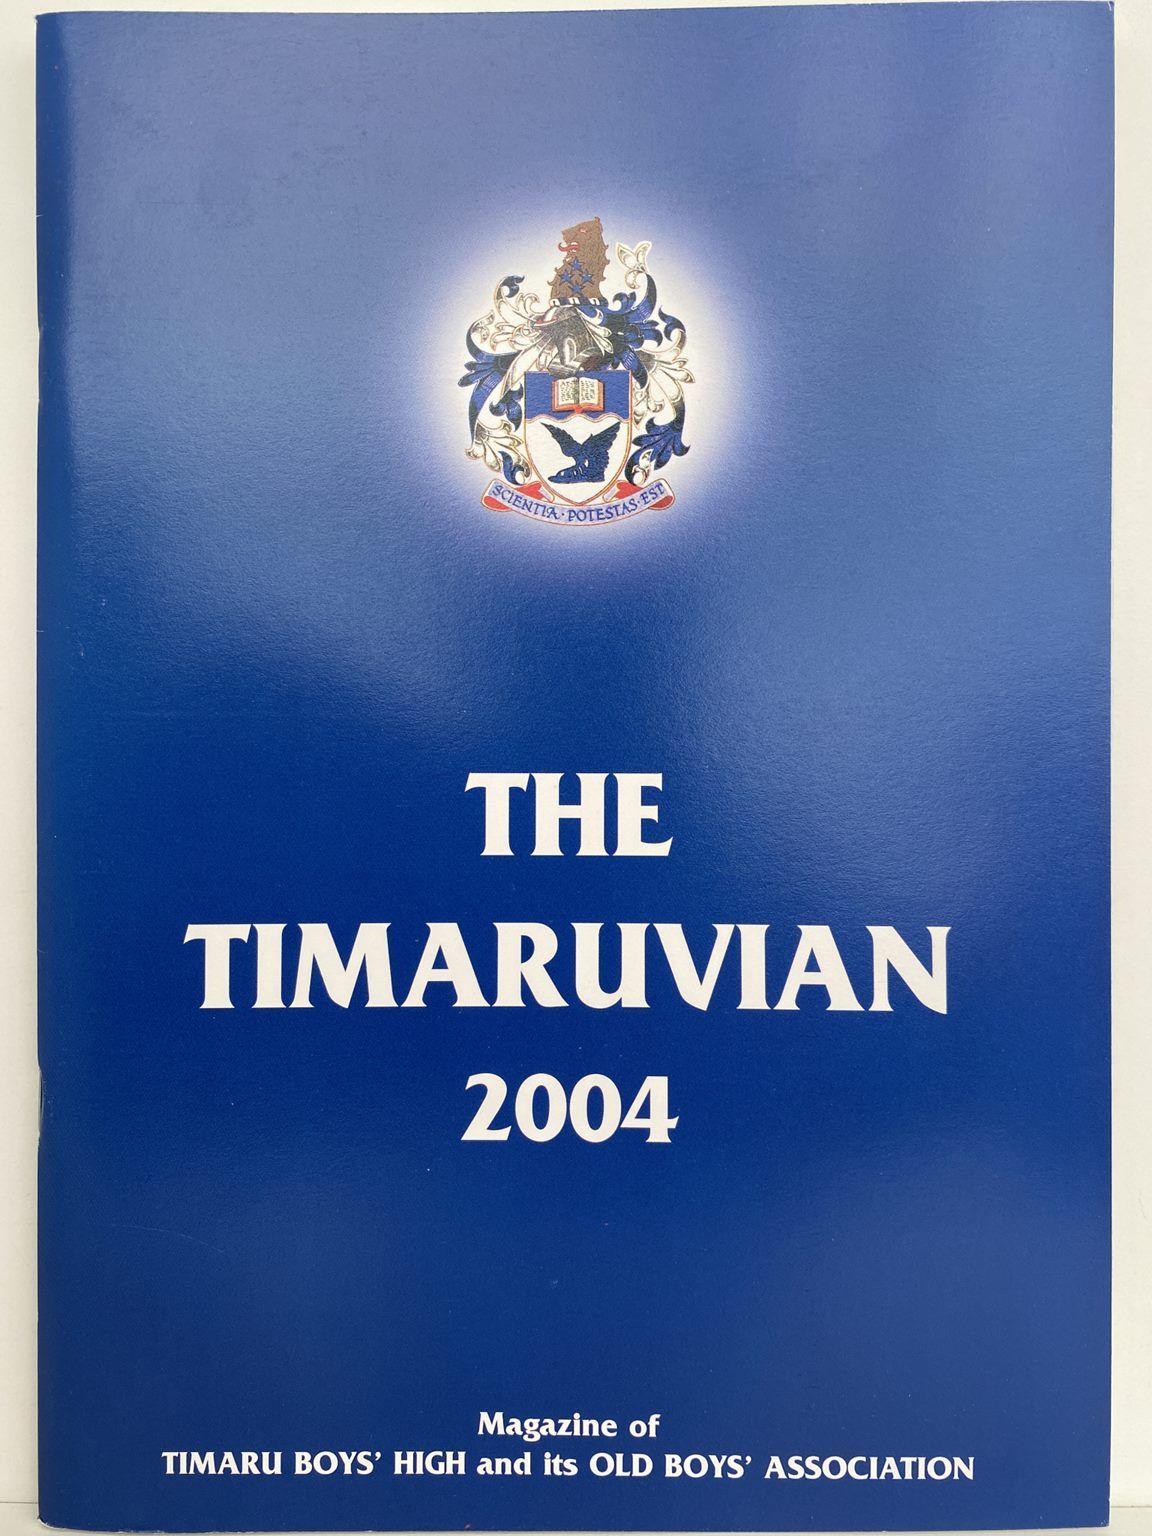 THE TIMARUVIAN: Magazine of the Timaru Boys' High School and its Old Boys' Association 2004